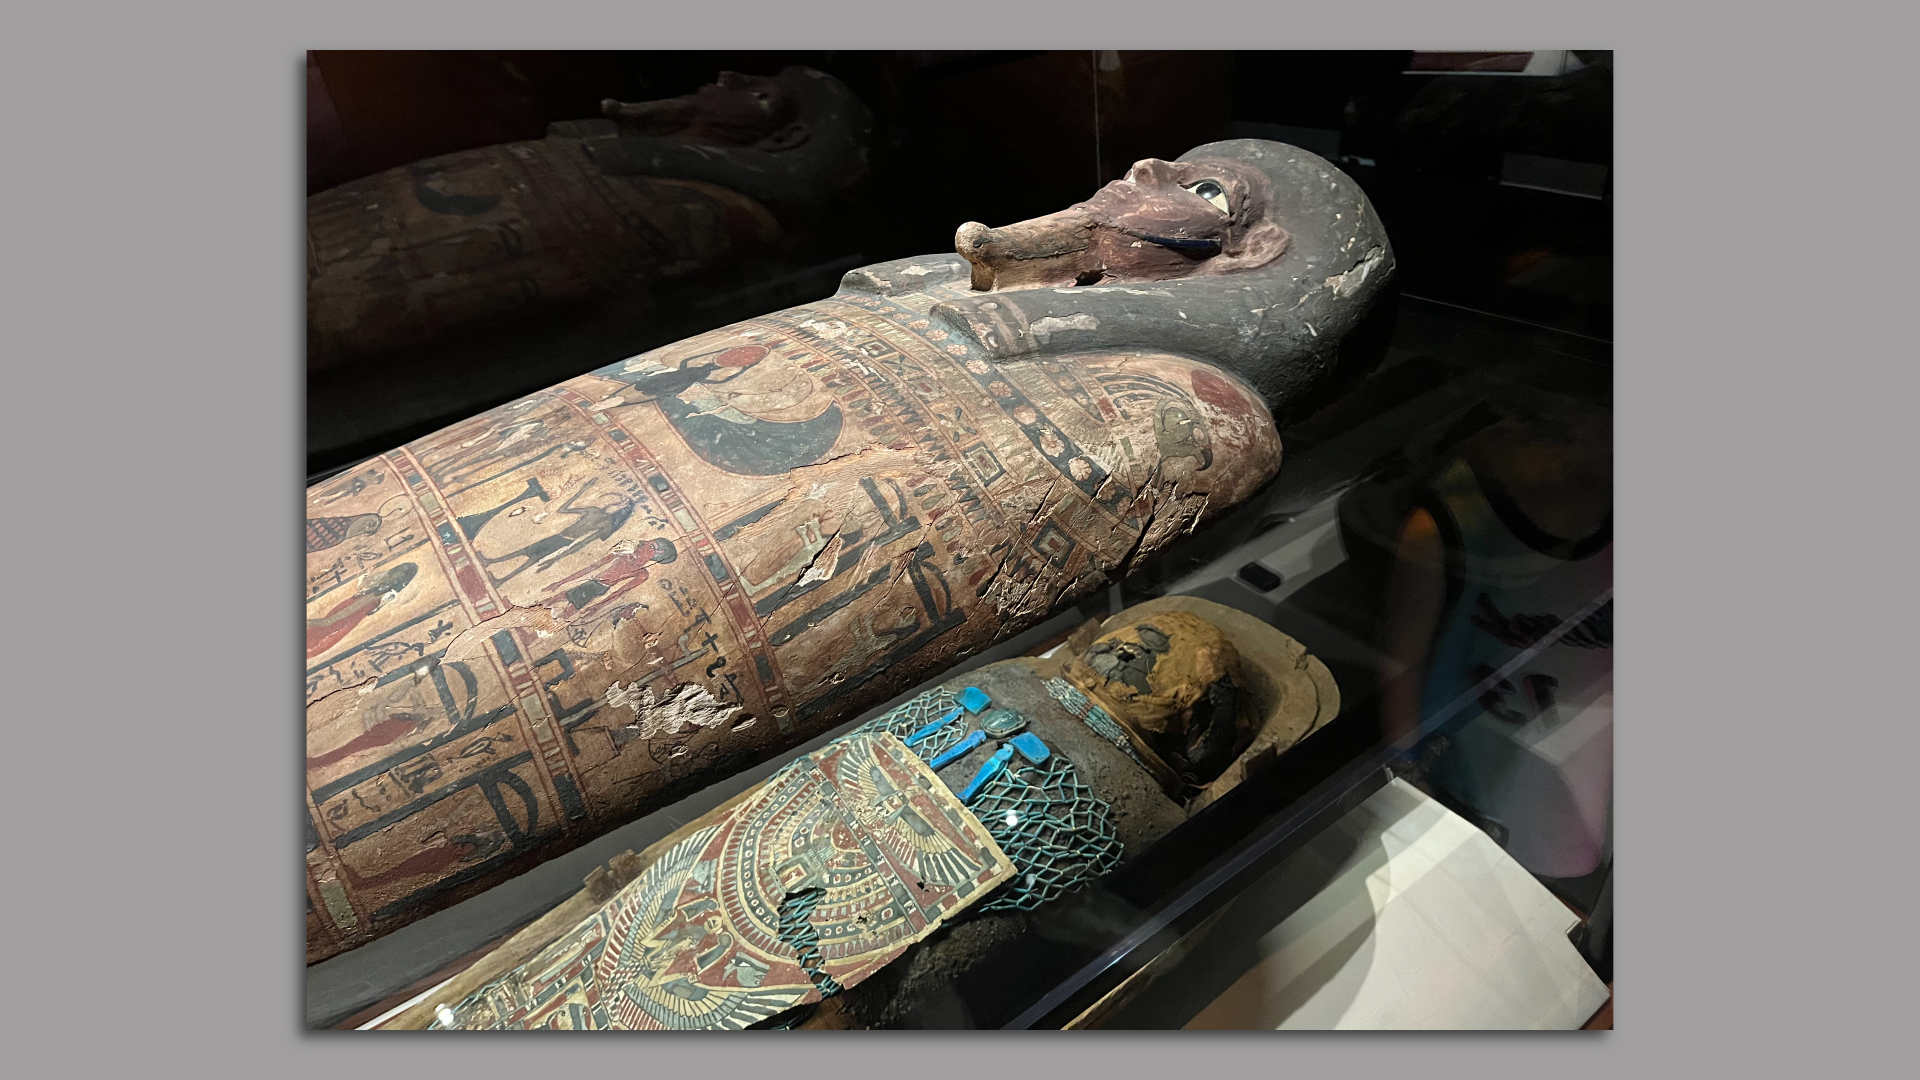 A mummy is pictured at an exhibit.